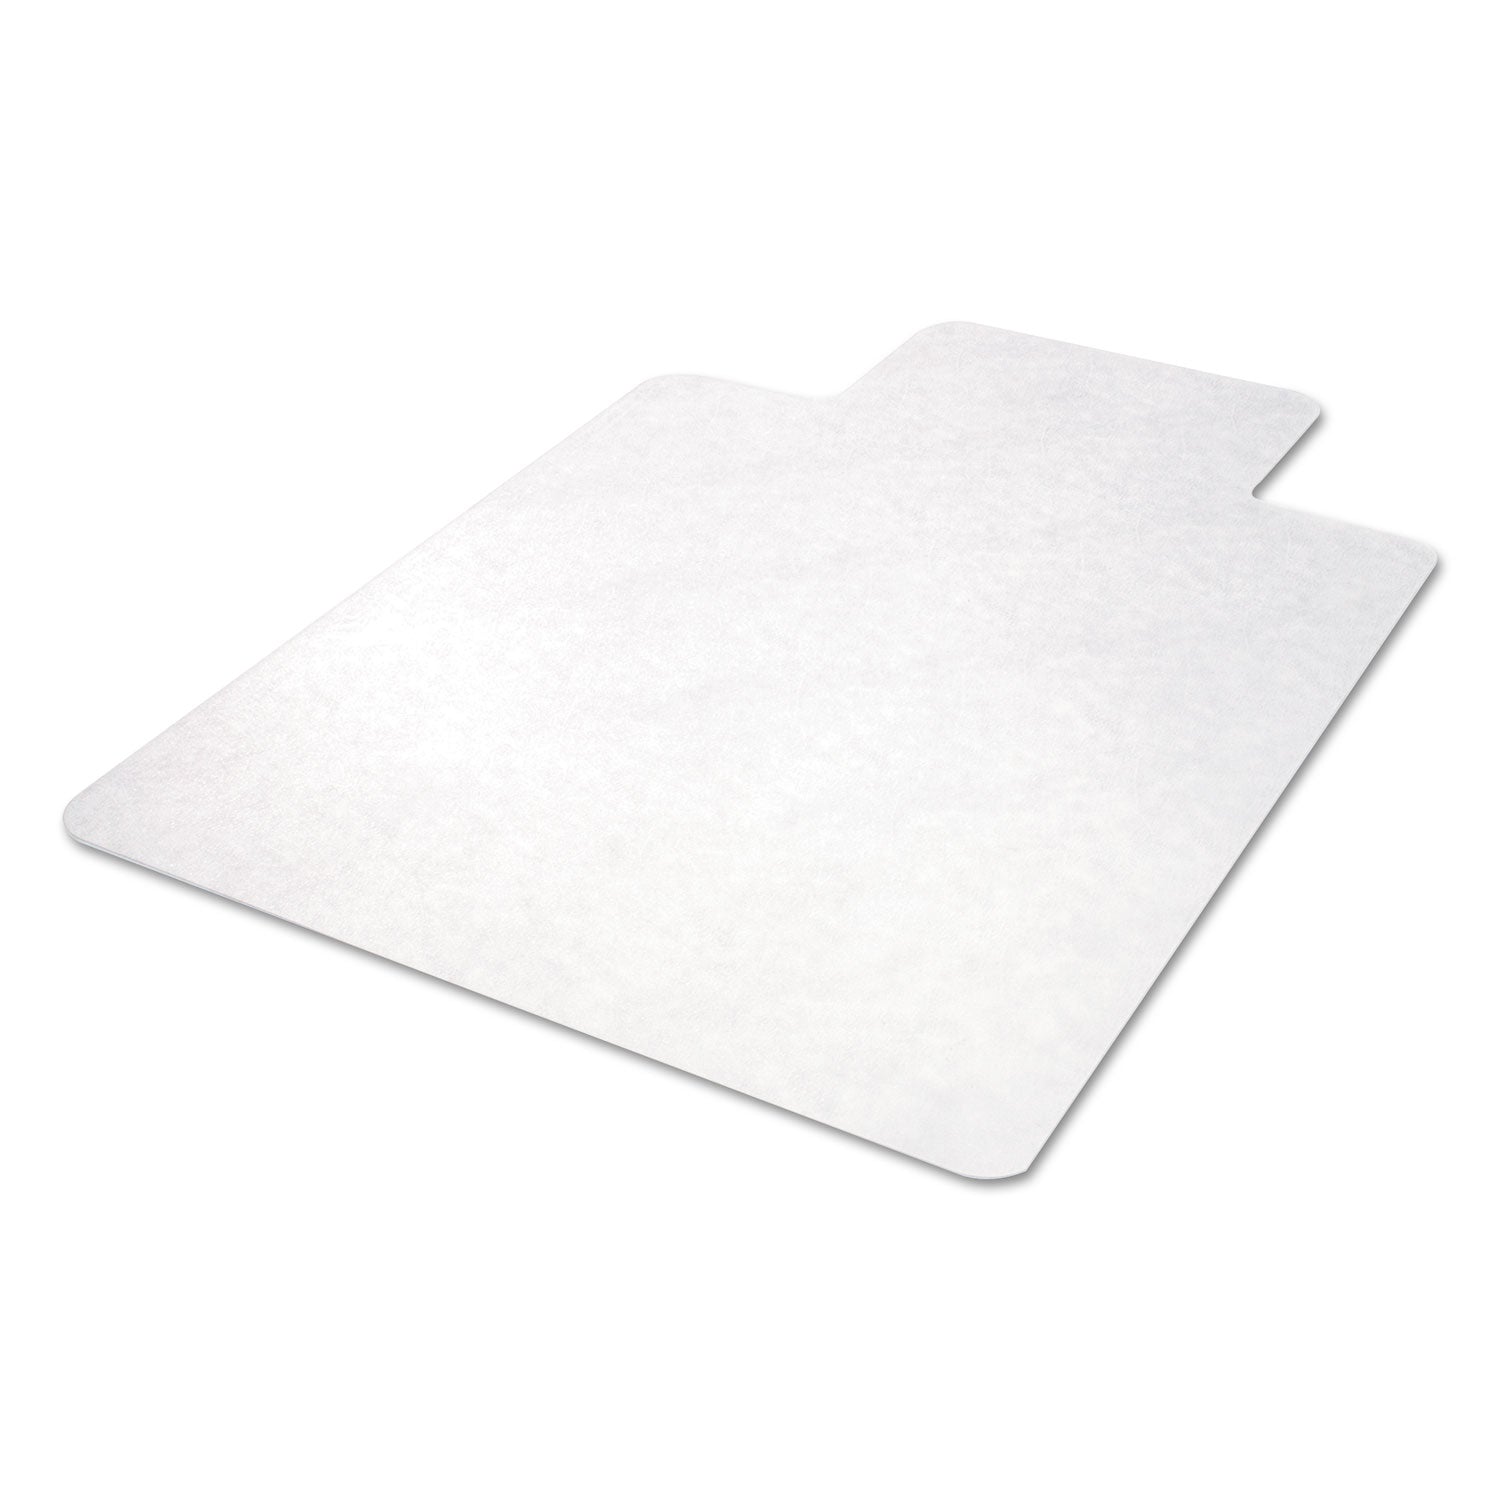 all-day-use-non-studded-chair-mat-for-hard-floors-36-x-48-lipped-clear_alemat3648hfl - 8